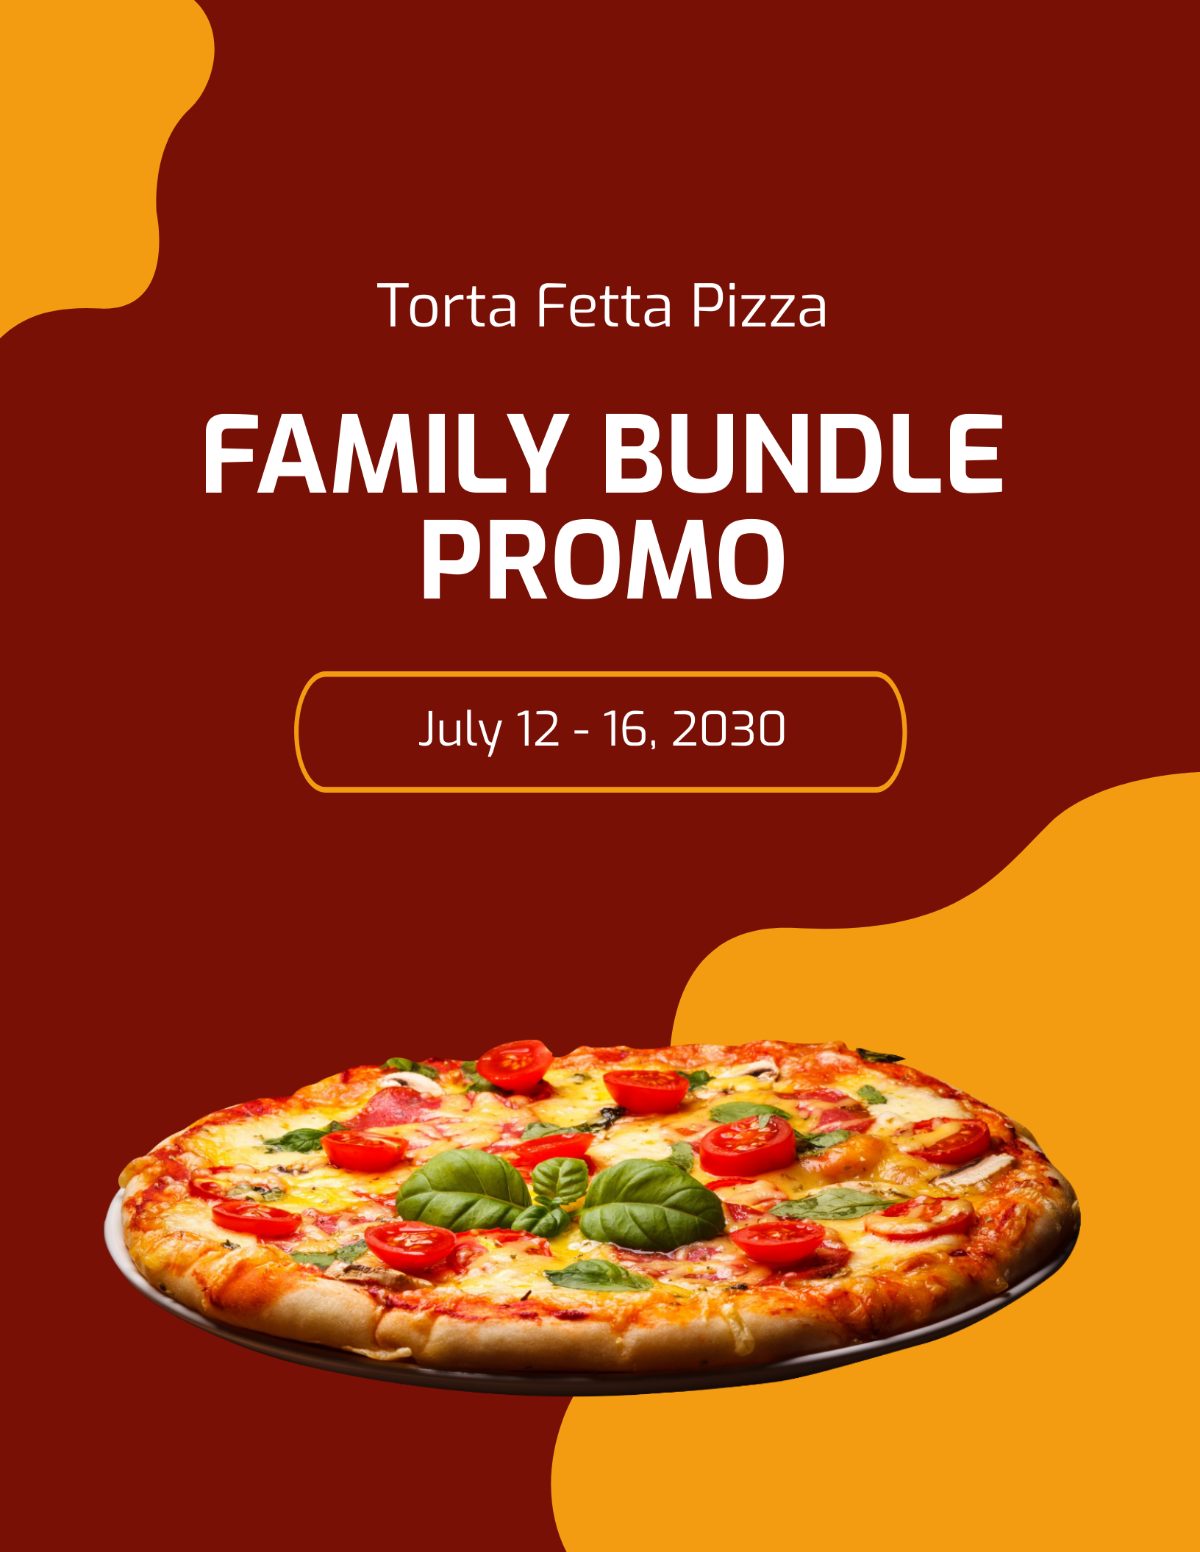 Free Pizza Promo Flyer Template